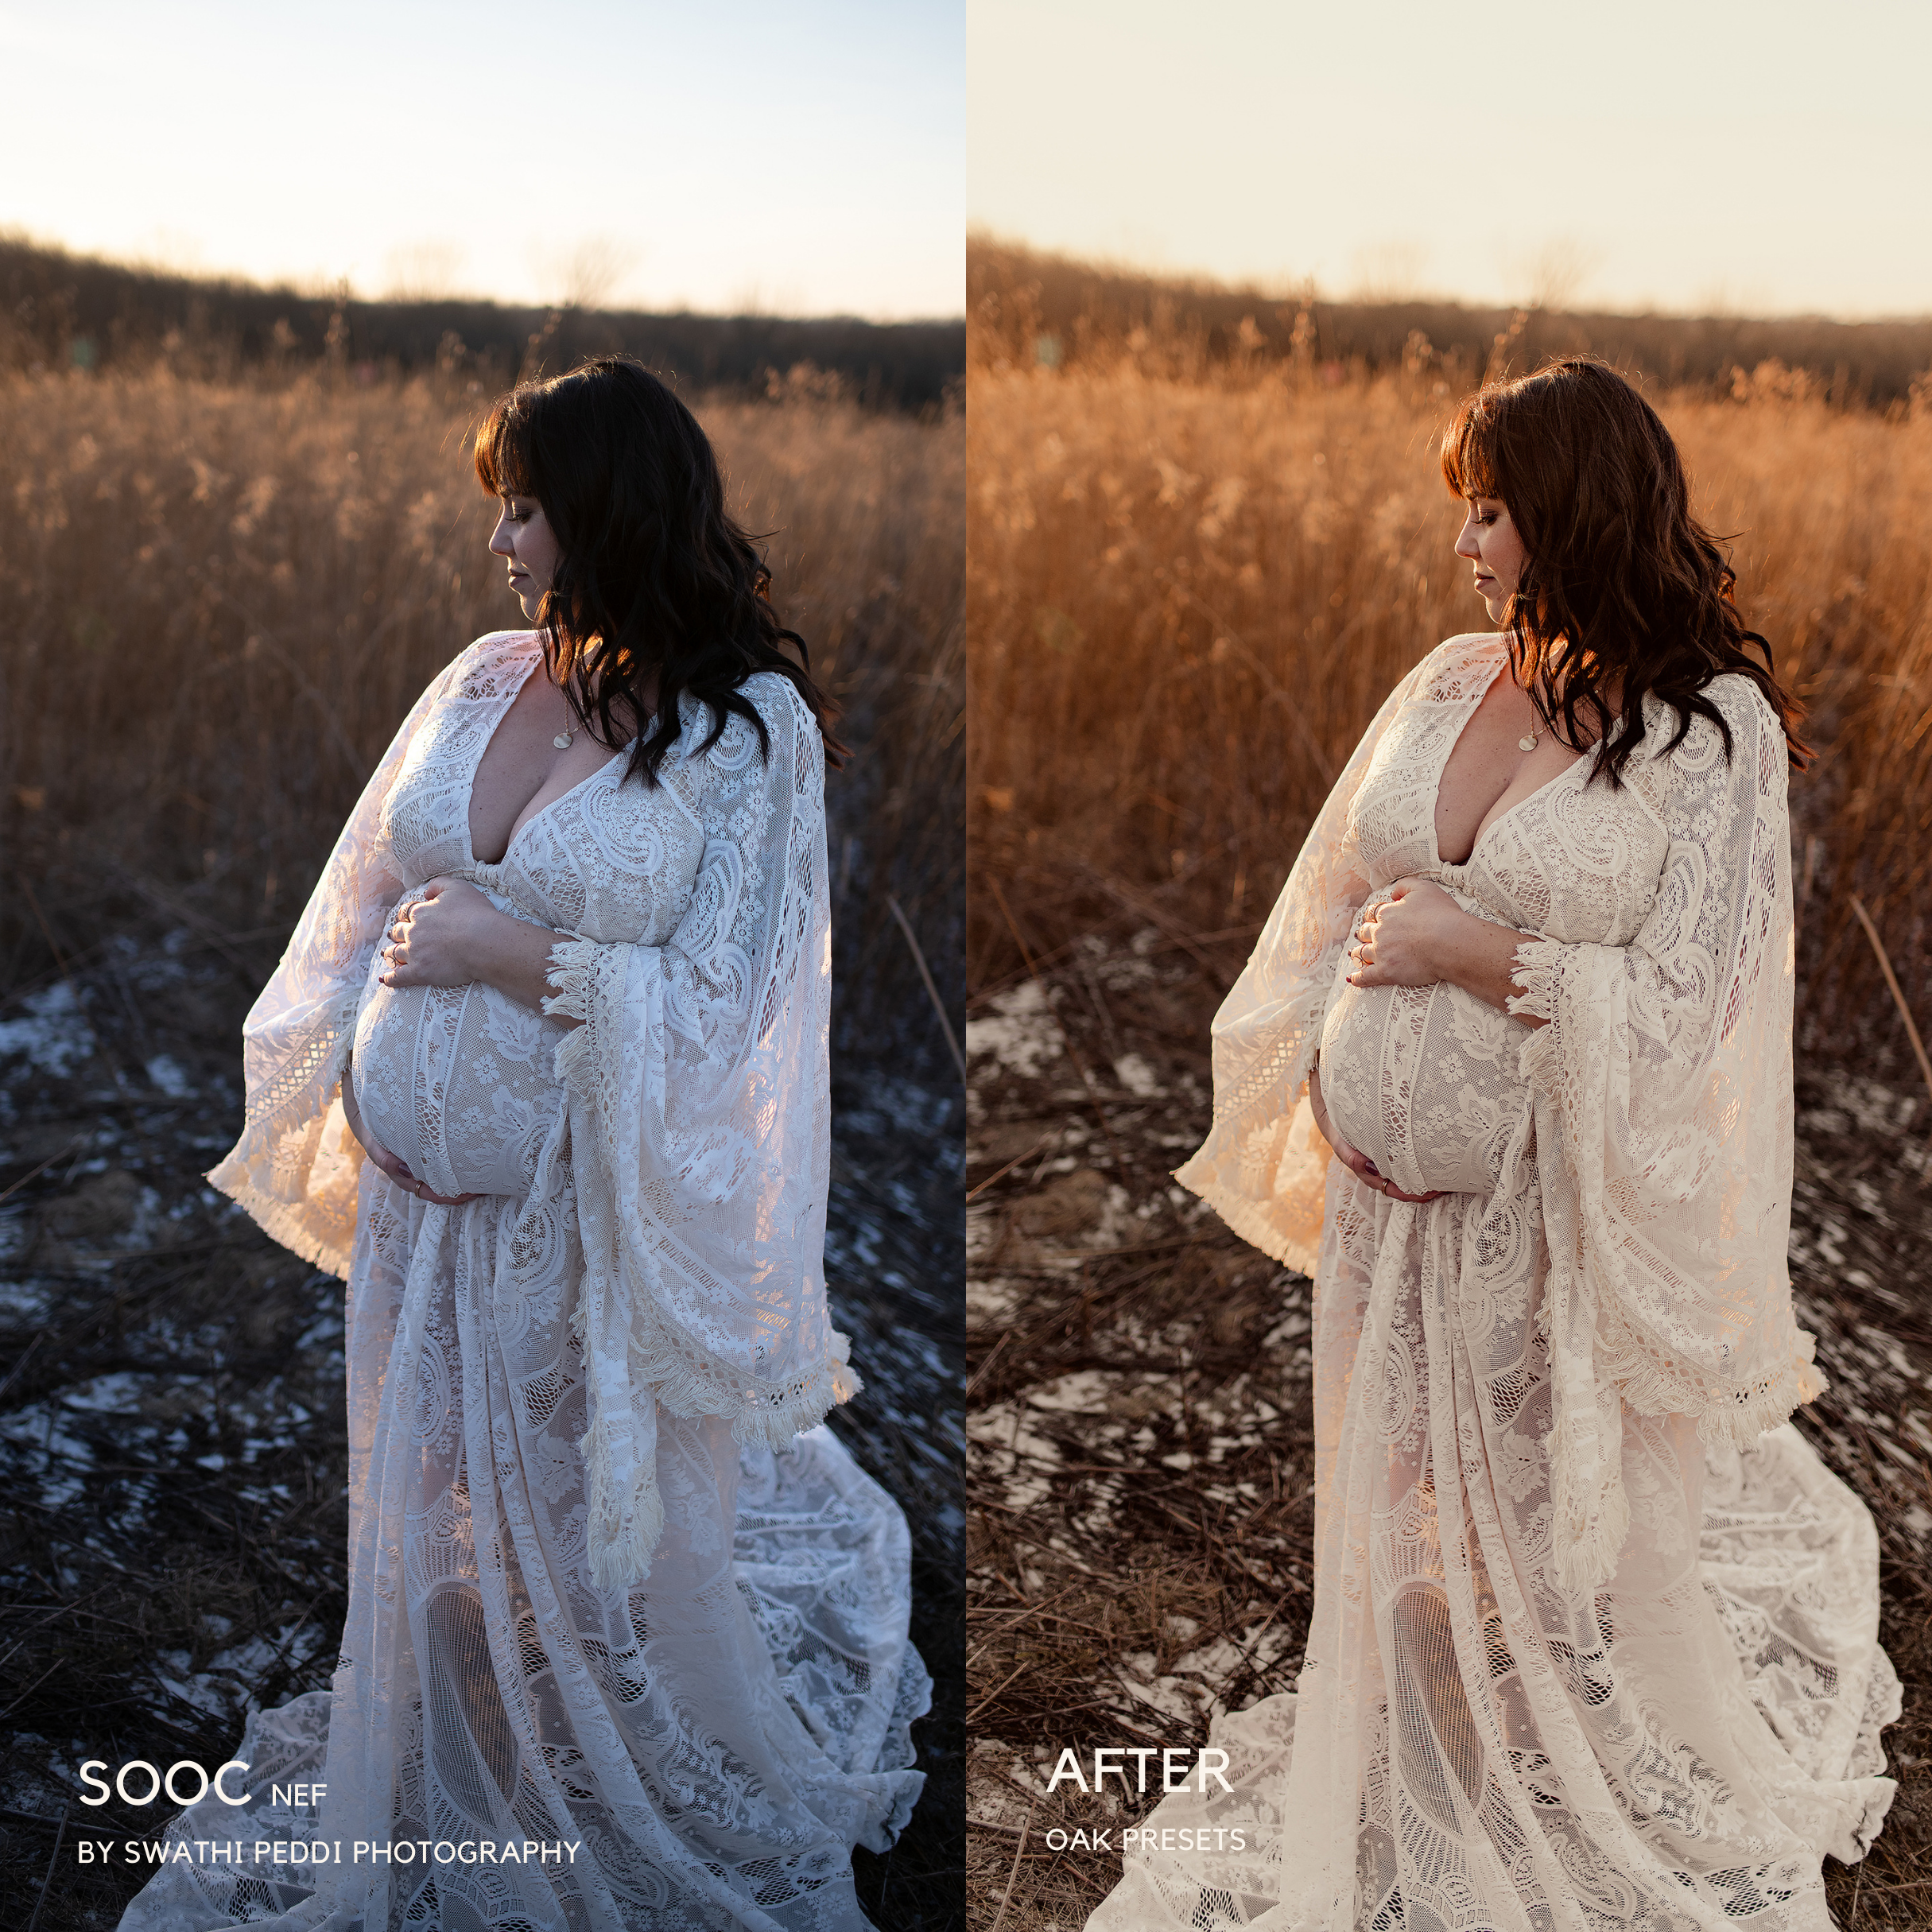 Outdoor Family Photography Lightroom Presets for Outdoor Family Maternity Photographers for Lightroom Outdoot Lightroom Presets & Newborn Photoshop Actions by Jessica G. Photography